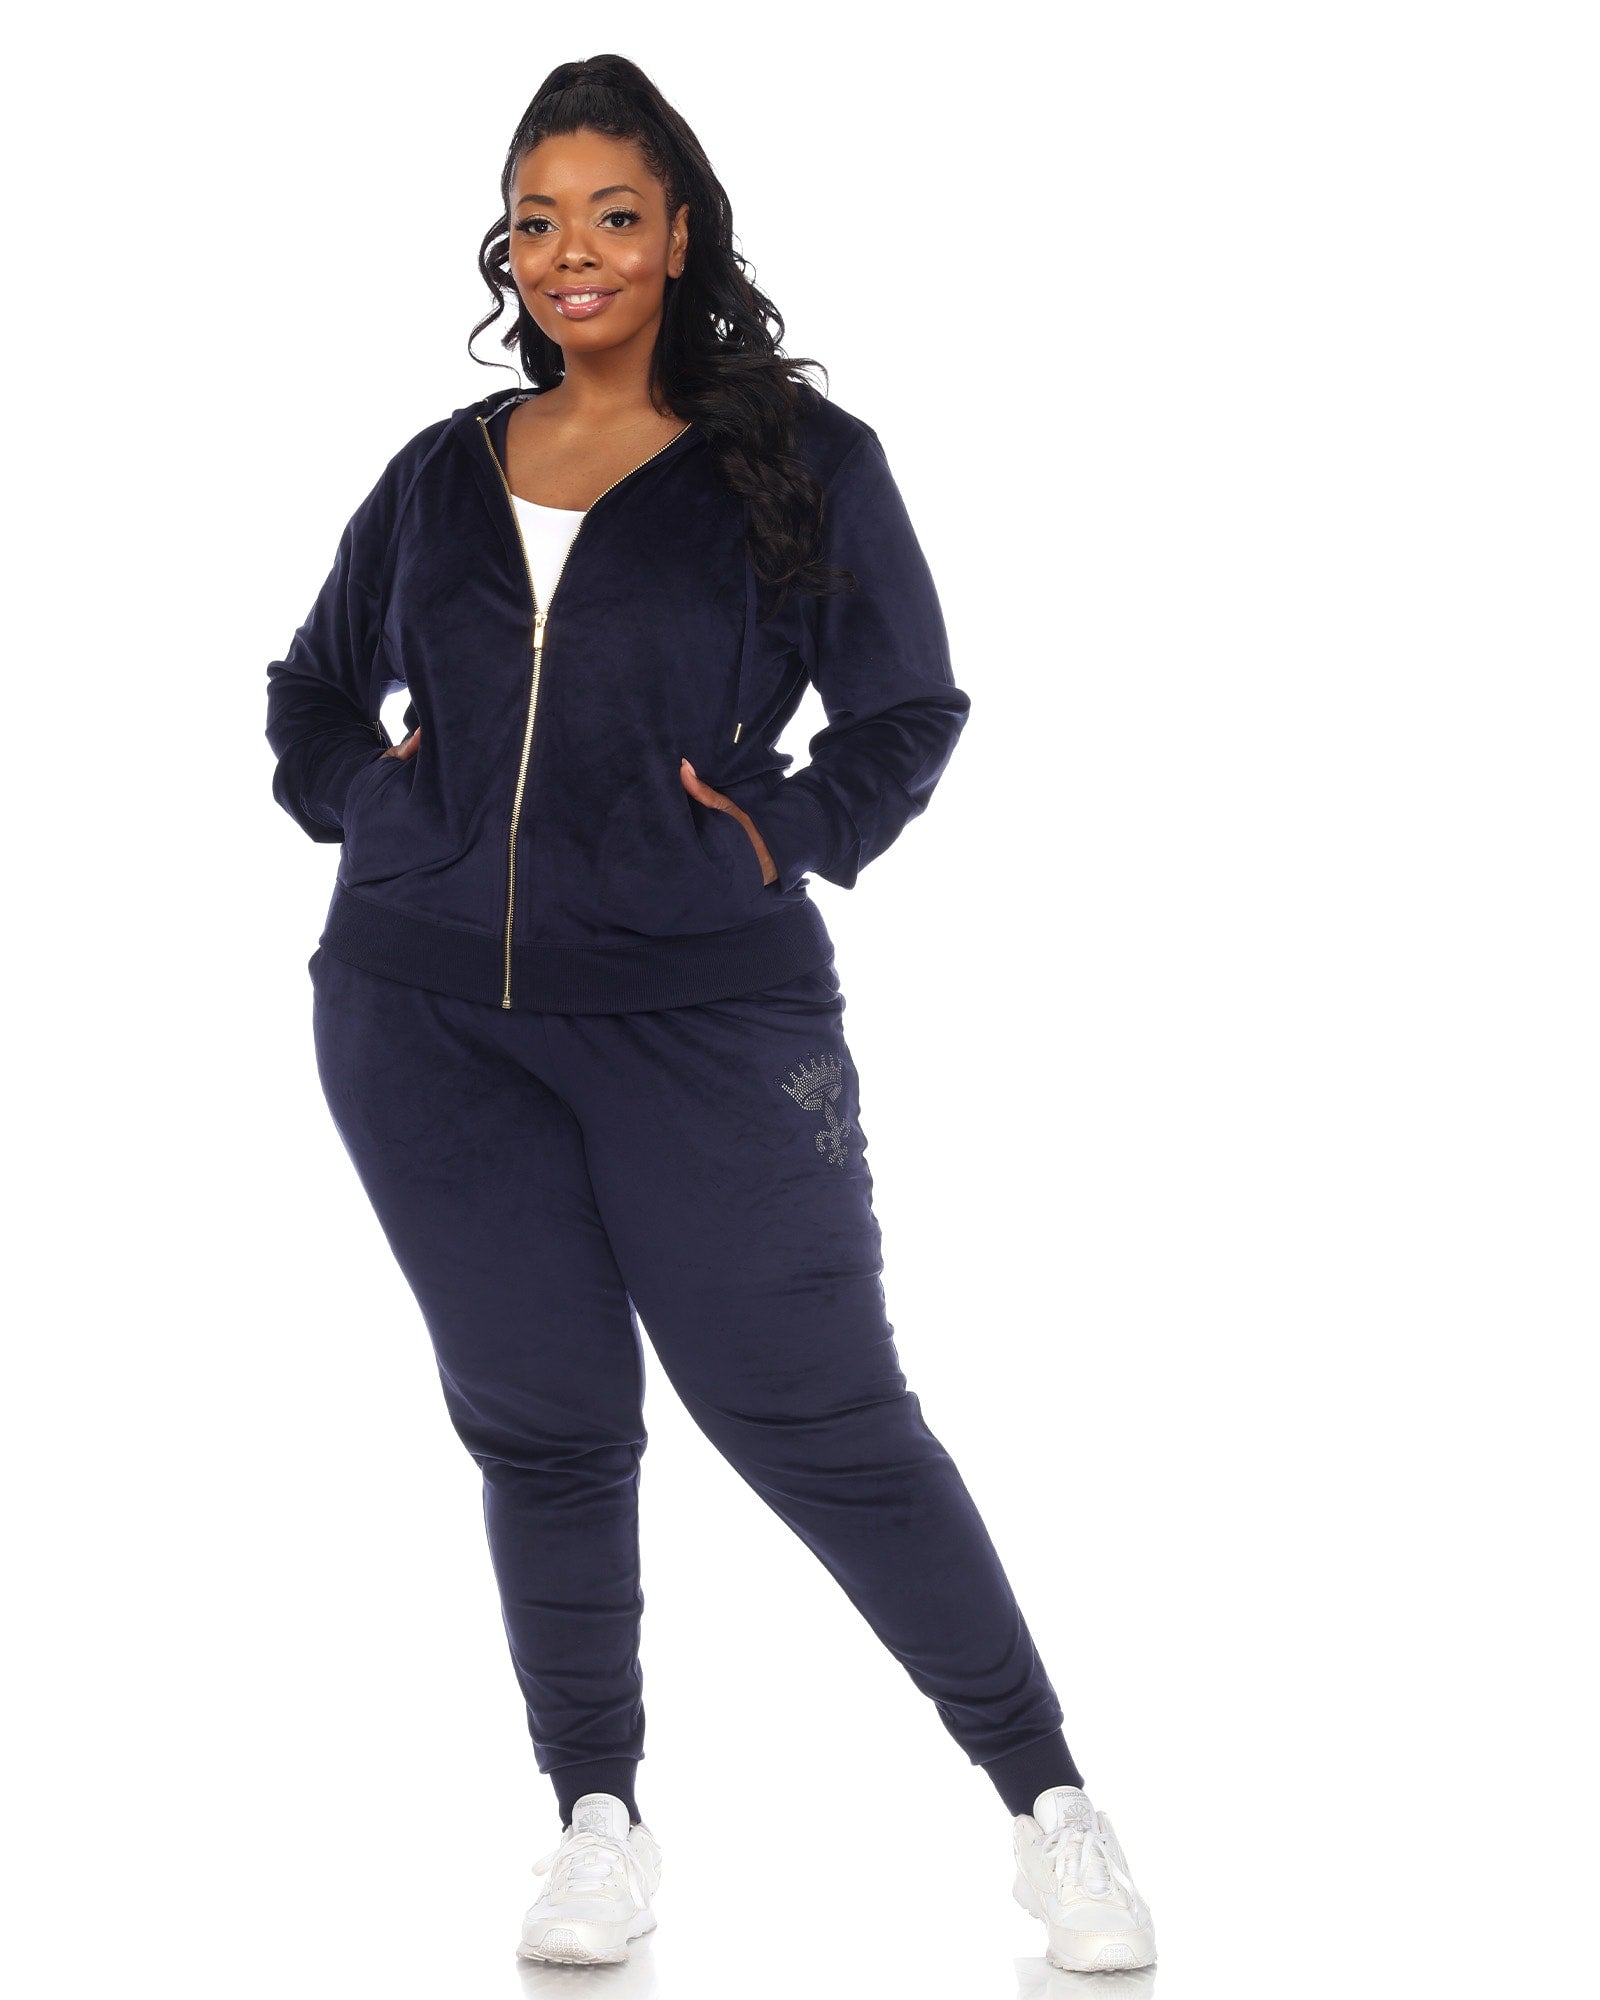 Long Sleeve Butterfly Two-Piece Outfit  Tracksuit women, Sweat suits  outfits, Fashion pants